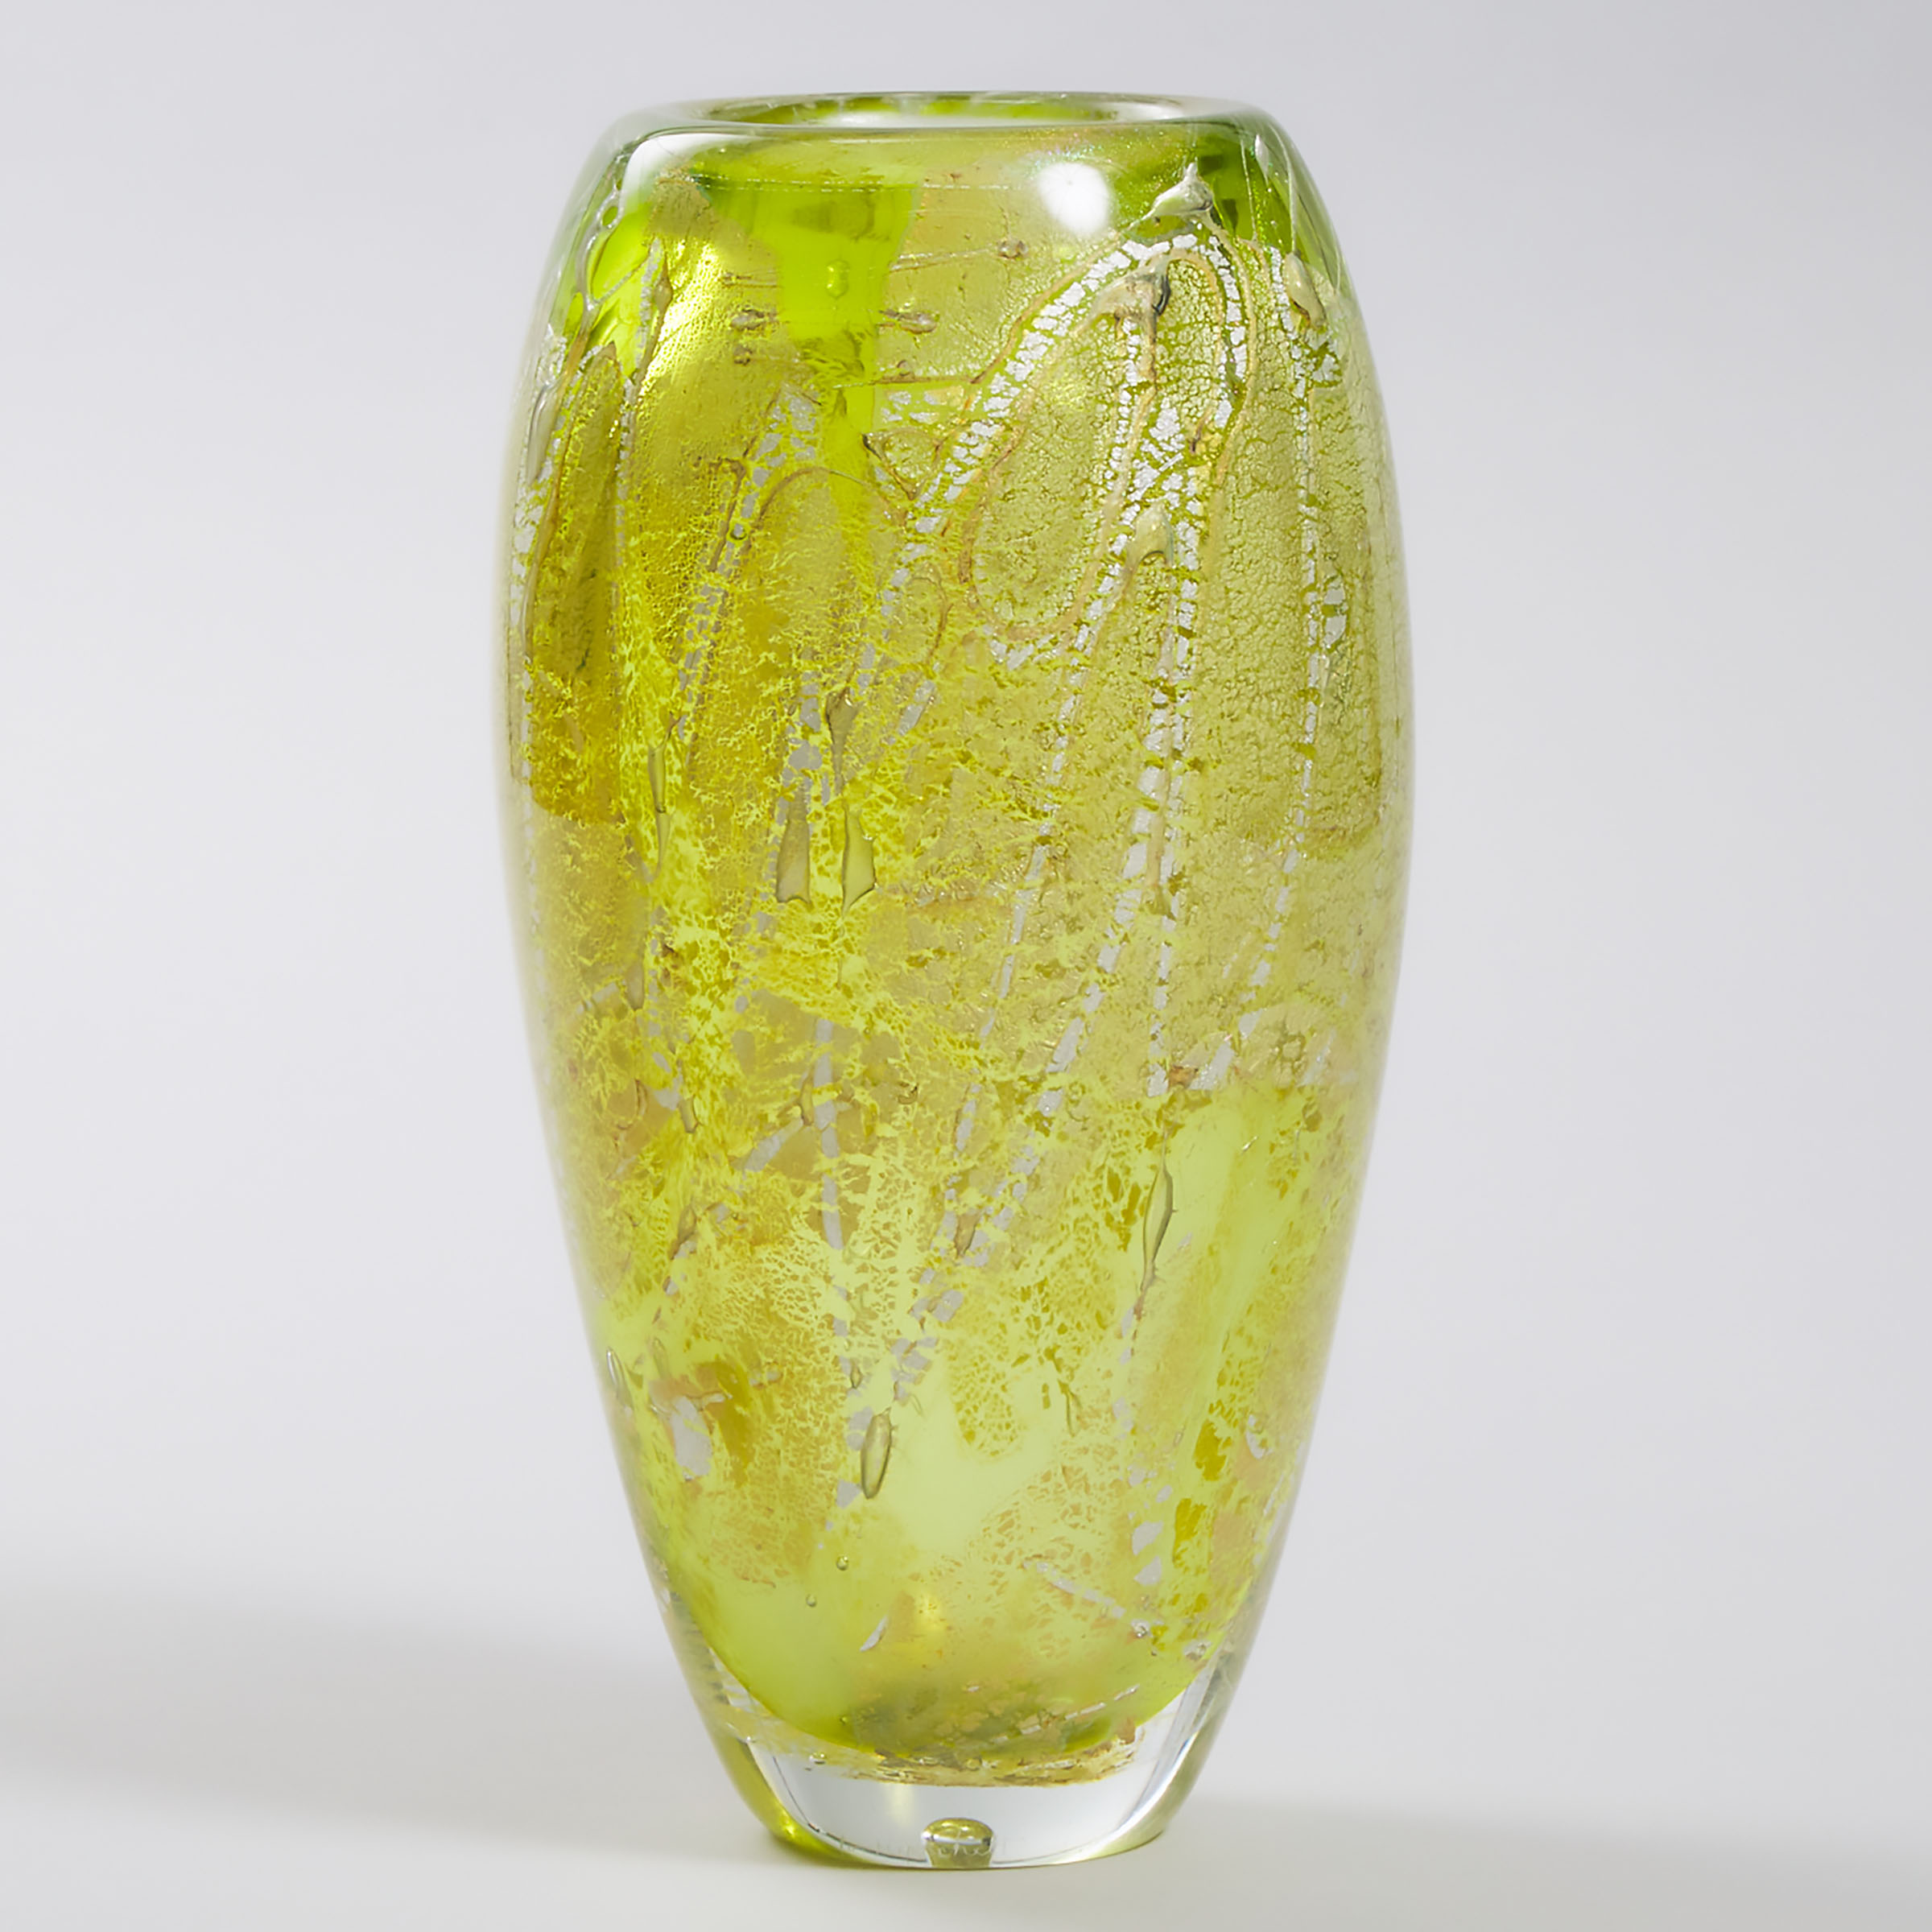 Christopher Ries (American, b.1952), Internally Decorated Glass Vase, 1979